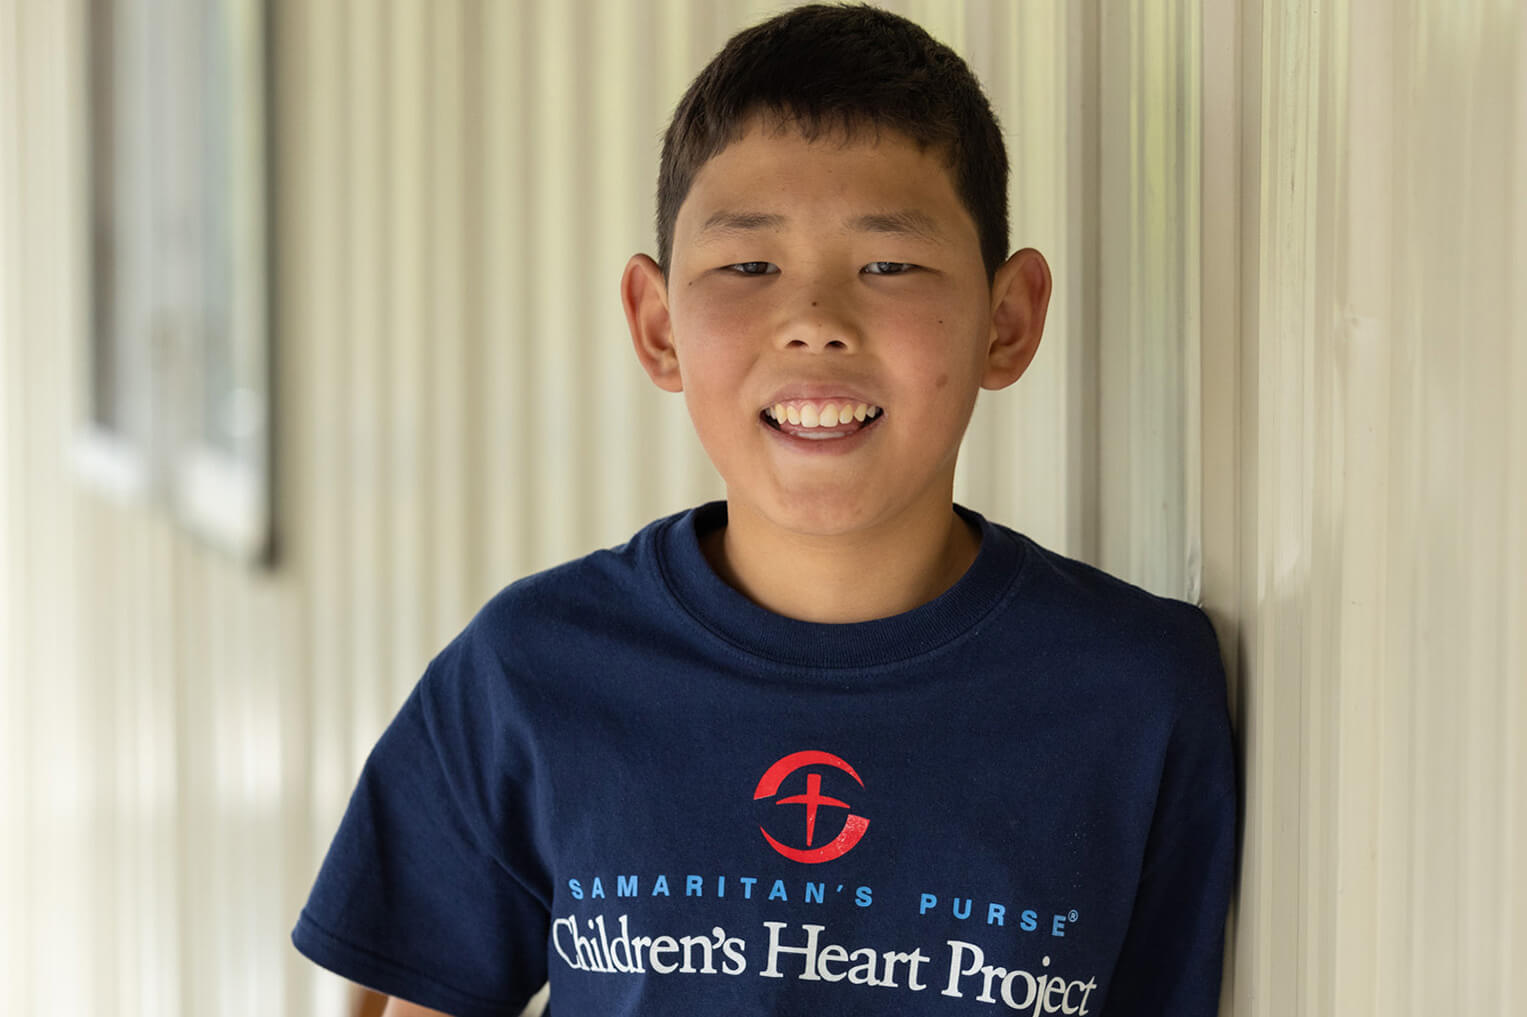 Erdembayar is one of nearly 1,500 children around the world who have received heart surgery through Children’s Heart Project.